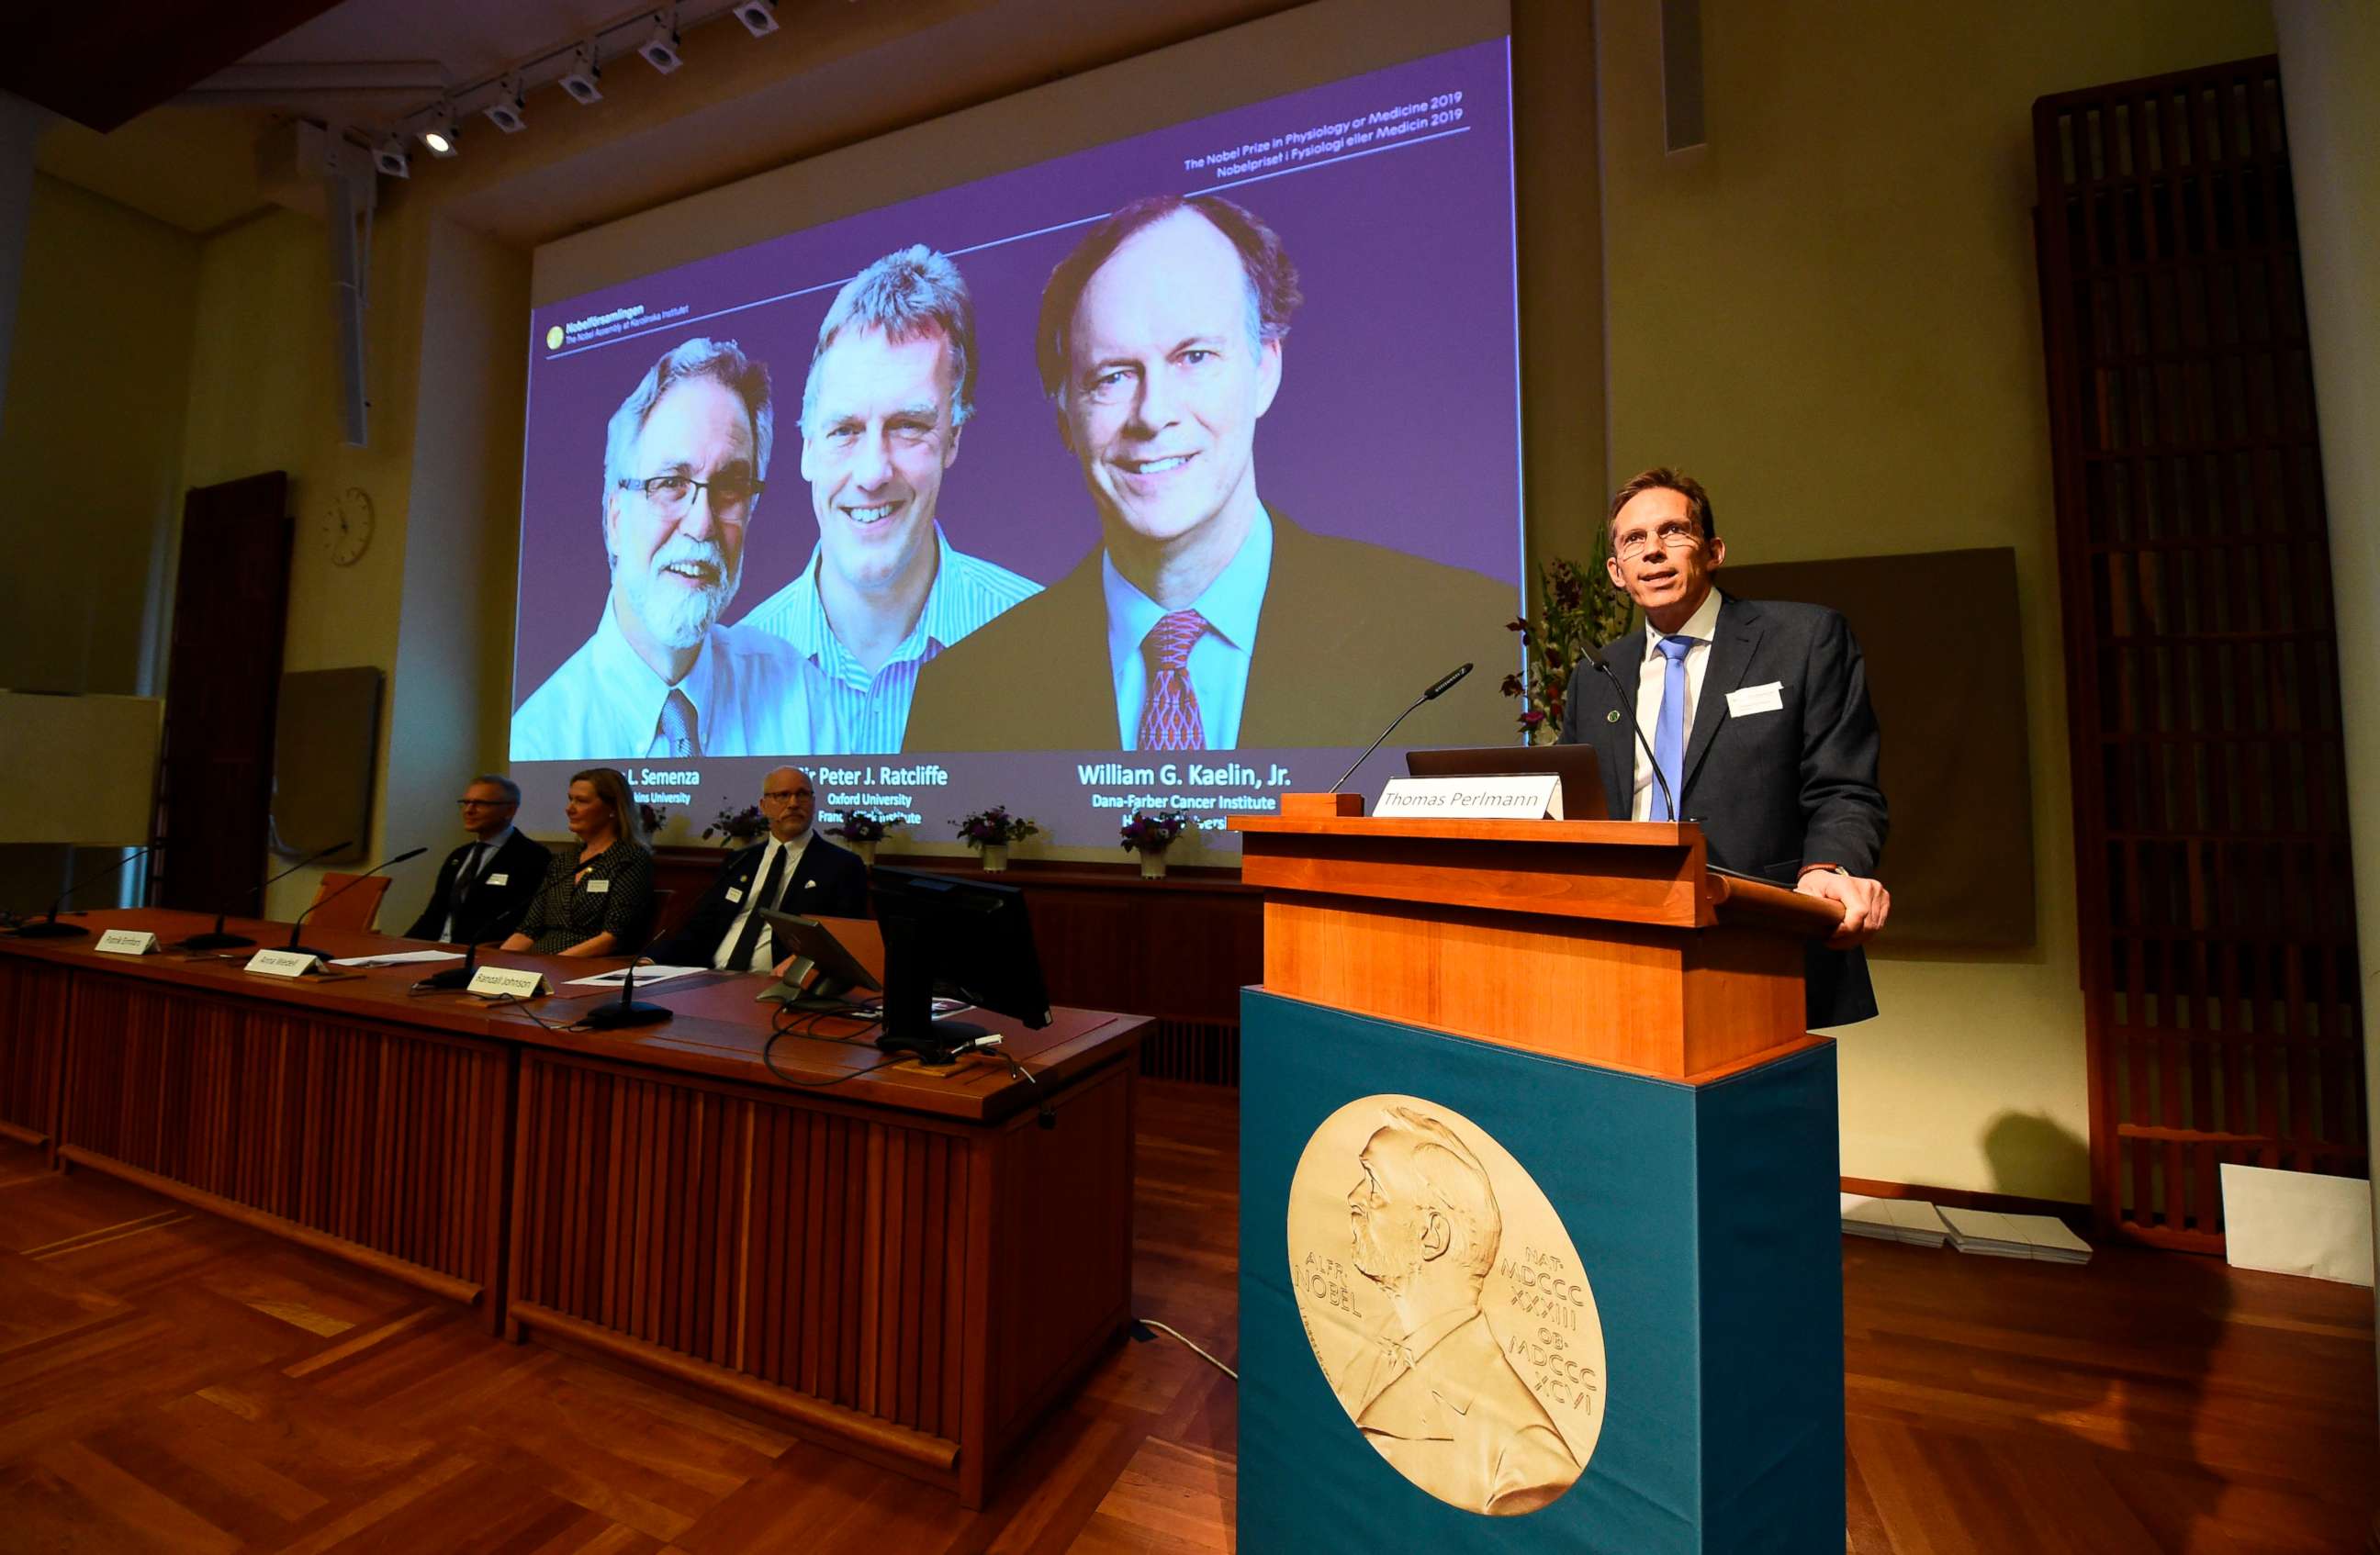 PHOTO: Thomas Perlmann (right), the secretary of the Nobel Committee, speaks as the winners are announced of the 2019 Nobel Prize in Physiology or Medicine during a press conference at the Karolinska Institute in Stockholm, Sweden, Oct. 7, 2019.